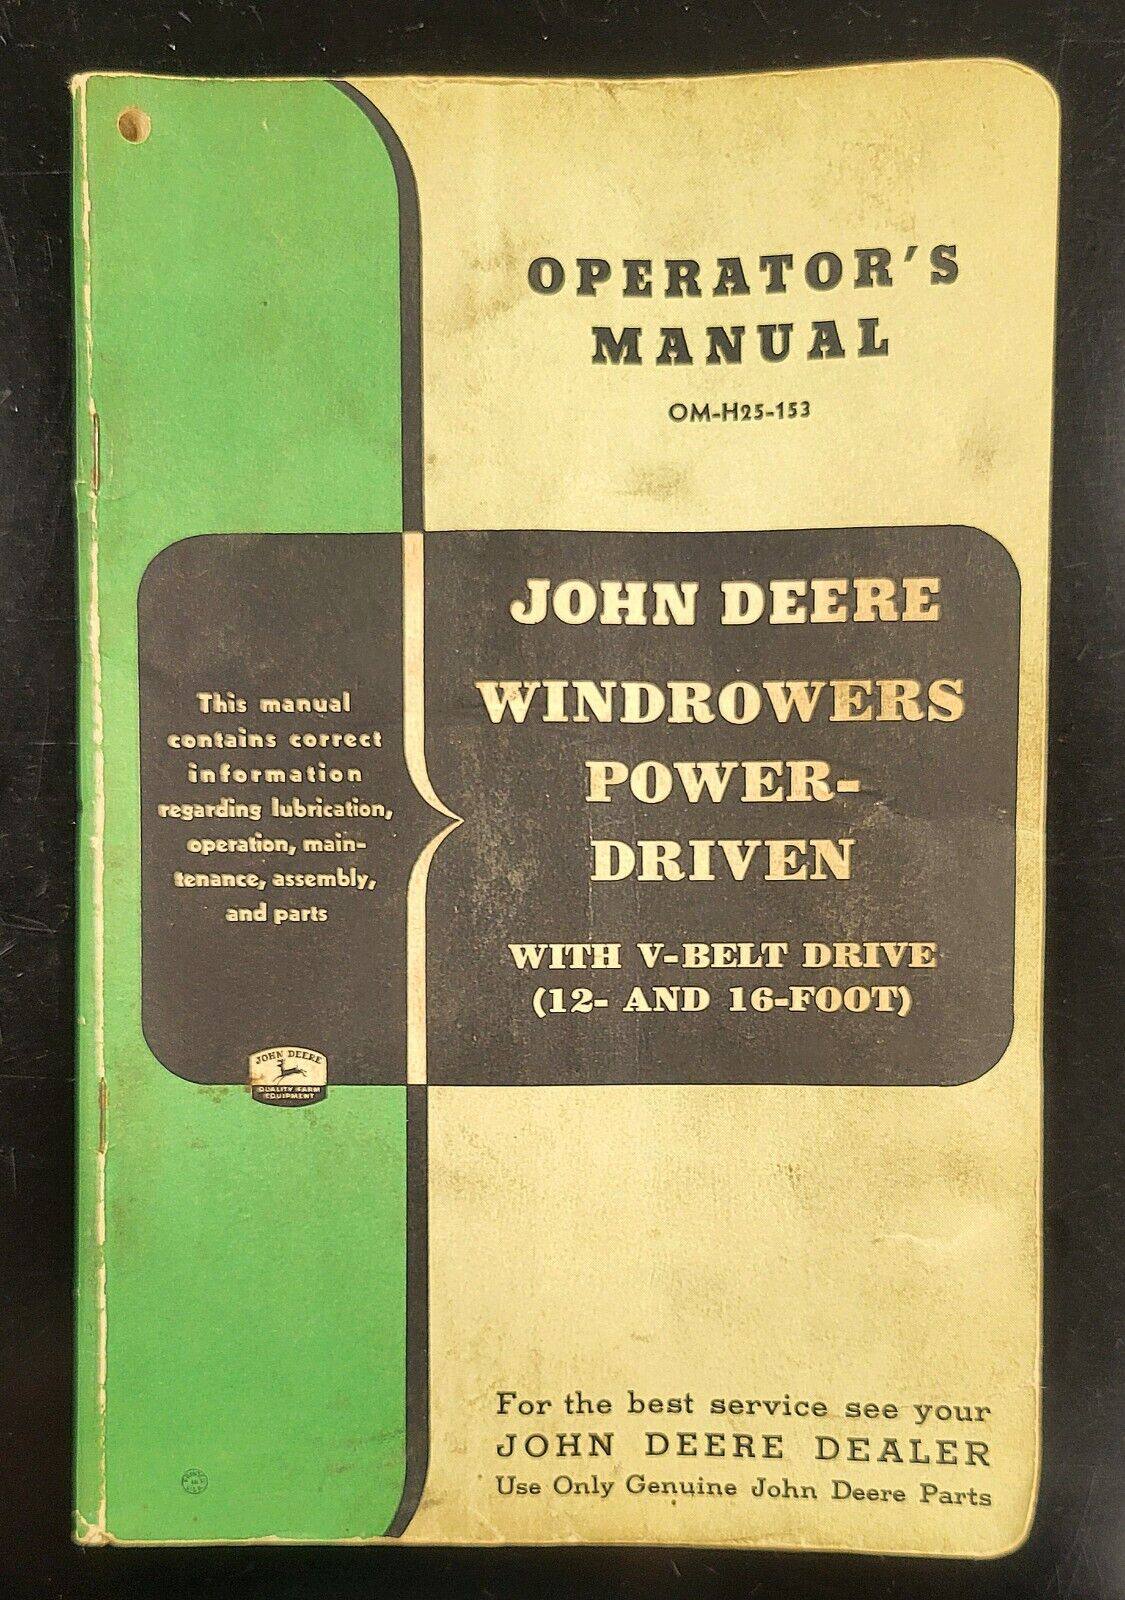 John Deere Operator’s Manual Windrowers Power-Driven with V-Belt, 12 and 16 foot